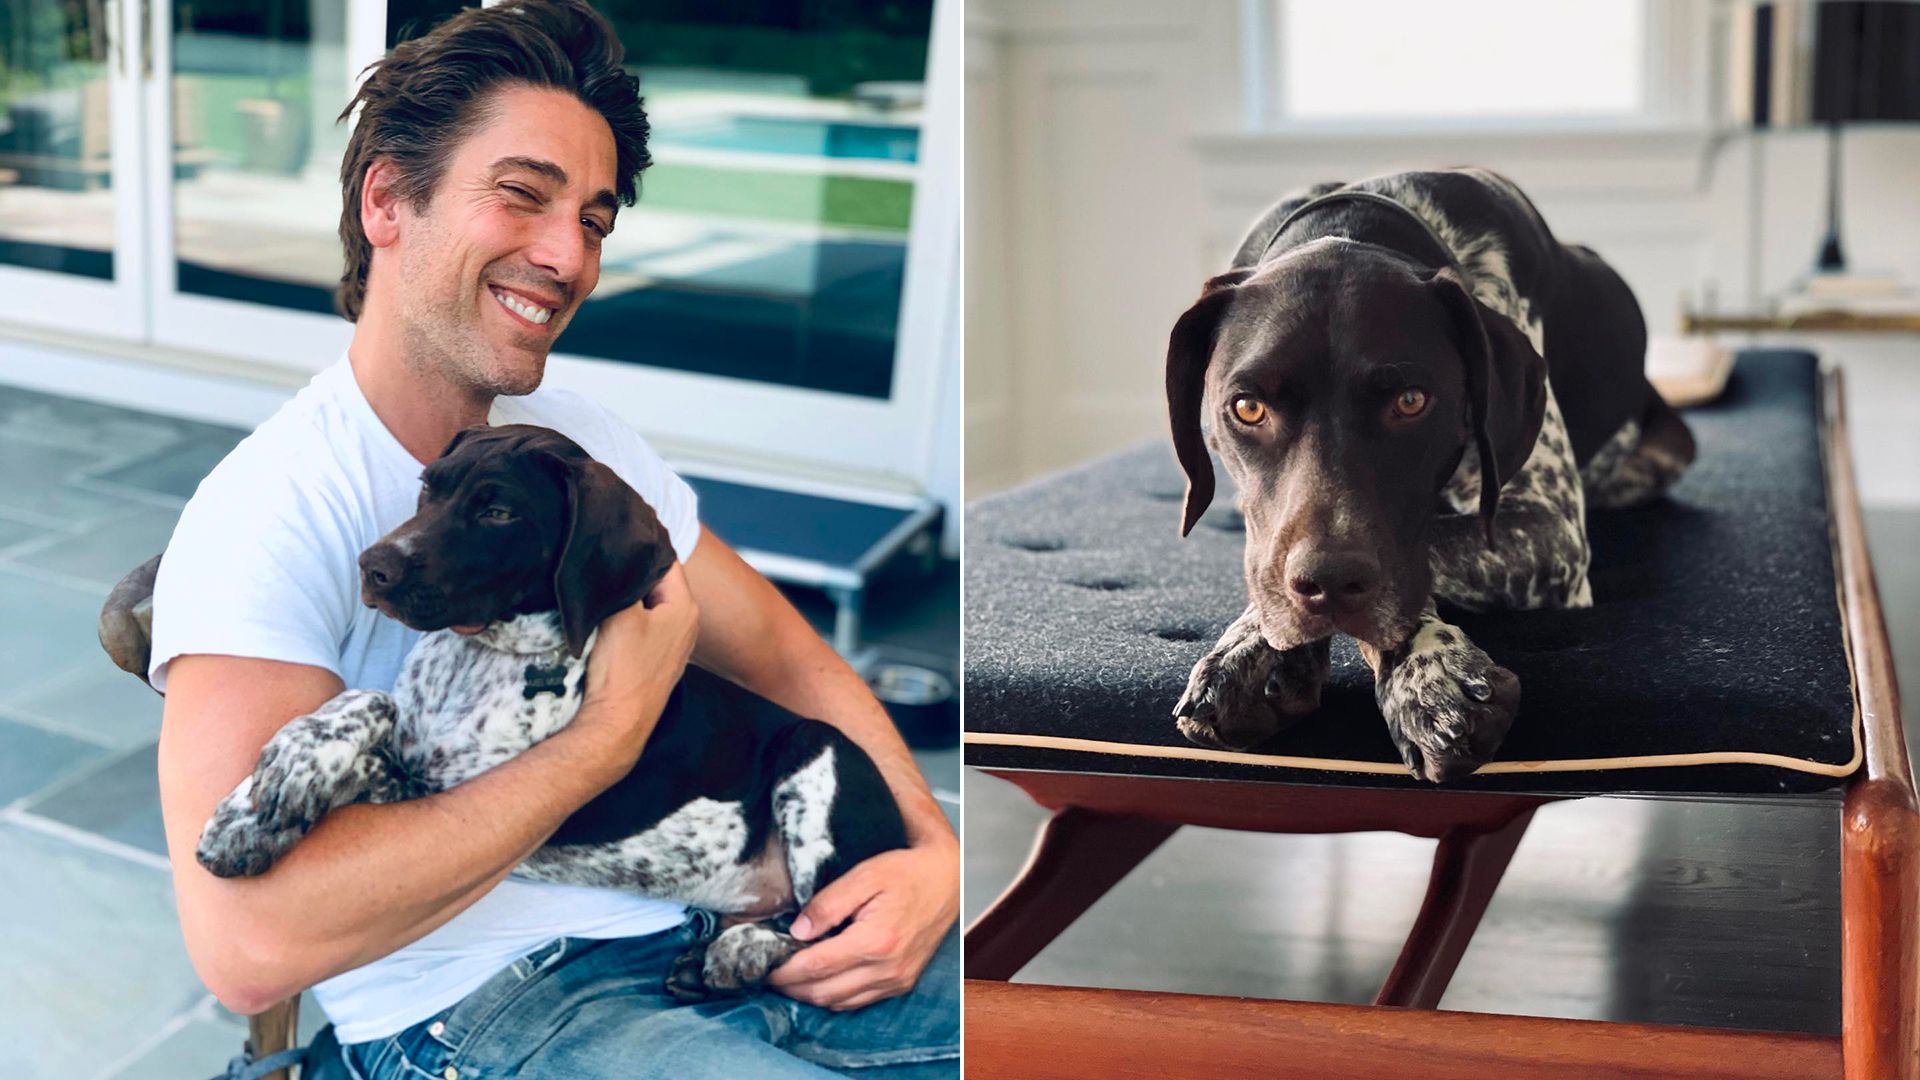 Split image of David Muir cuddling his dog Axel, and Axel sitting in their home.